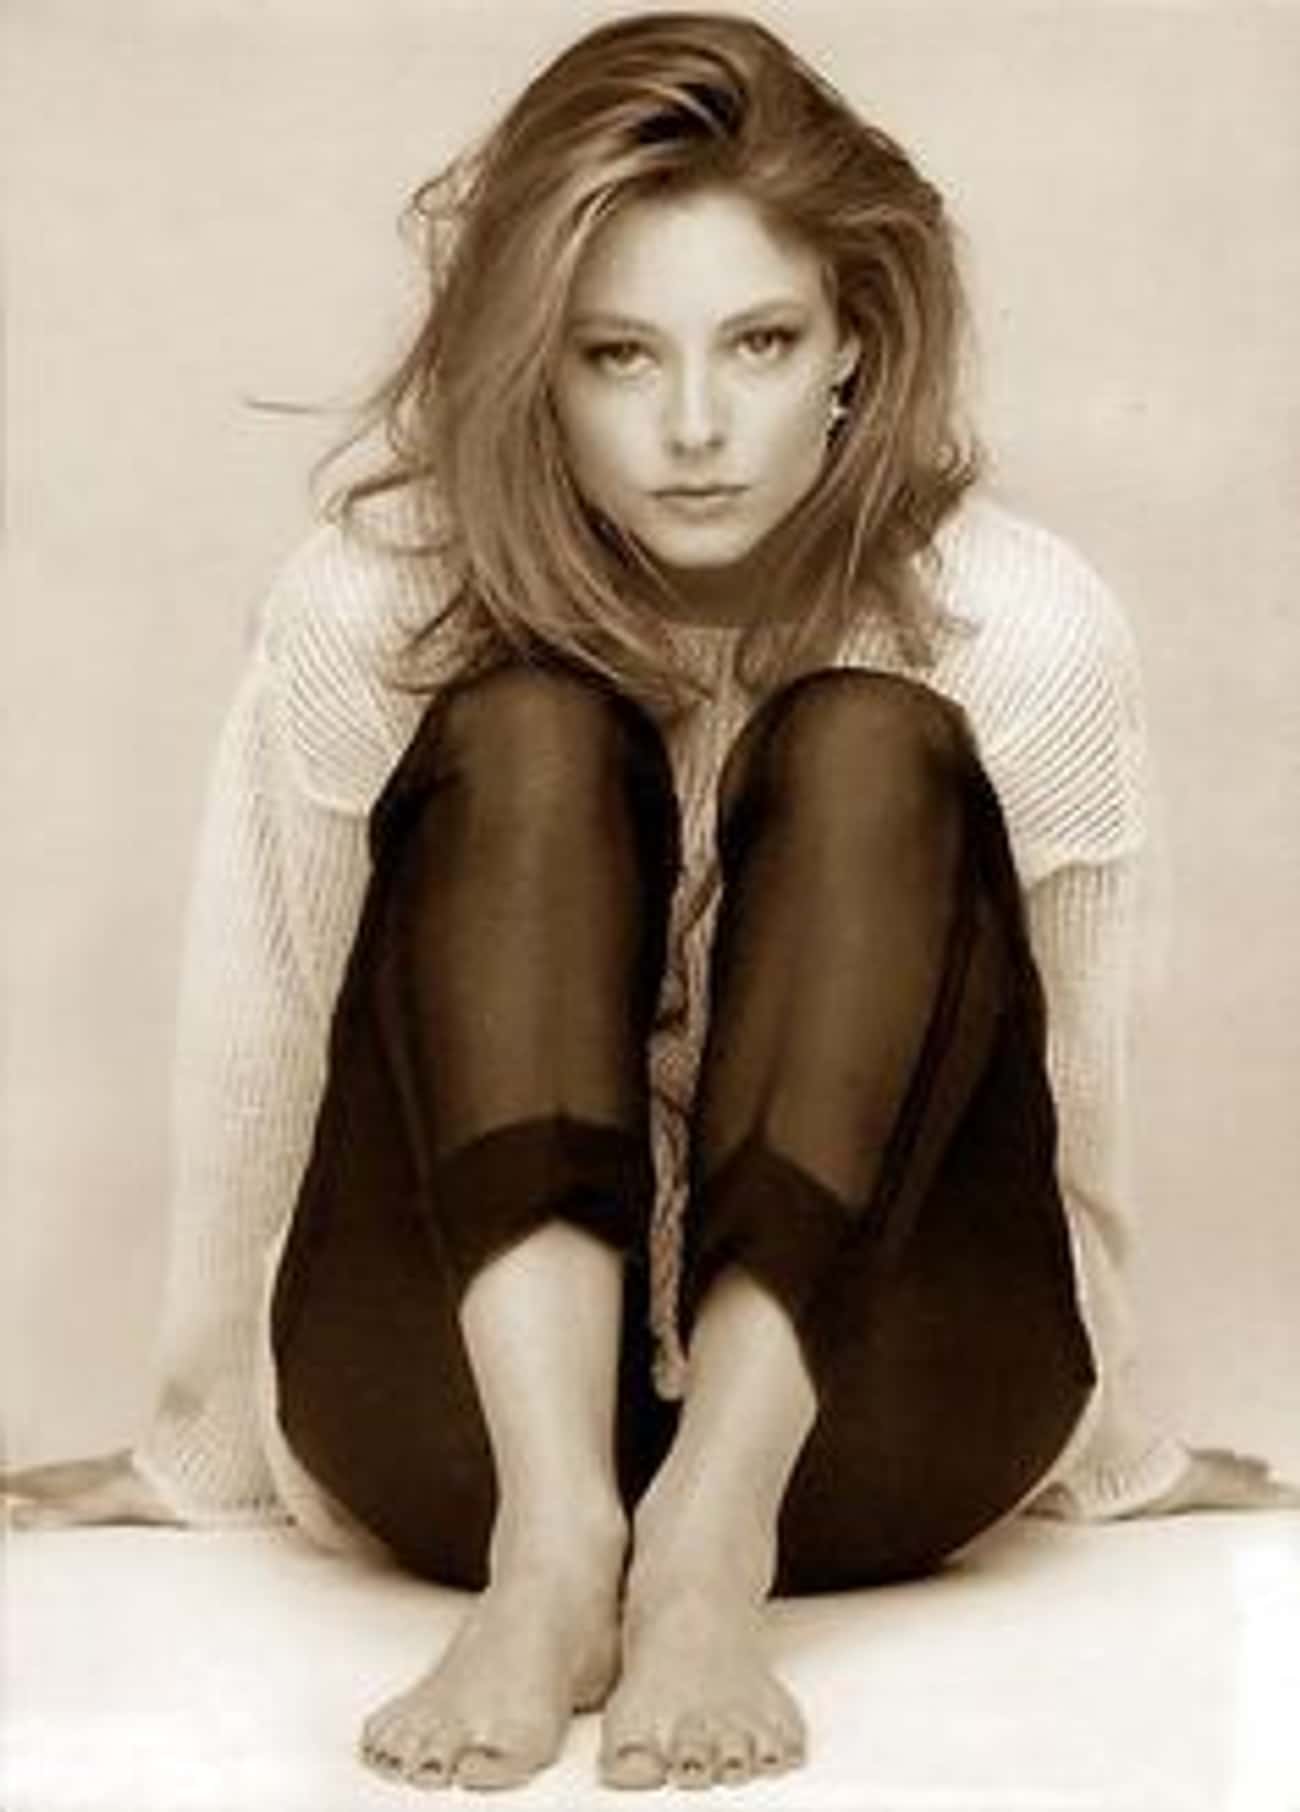 Young Jodie Foster in White Sweater and Black Pants